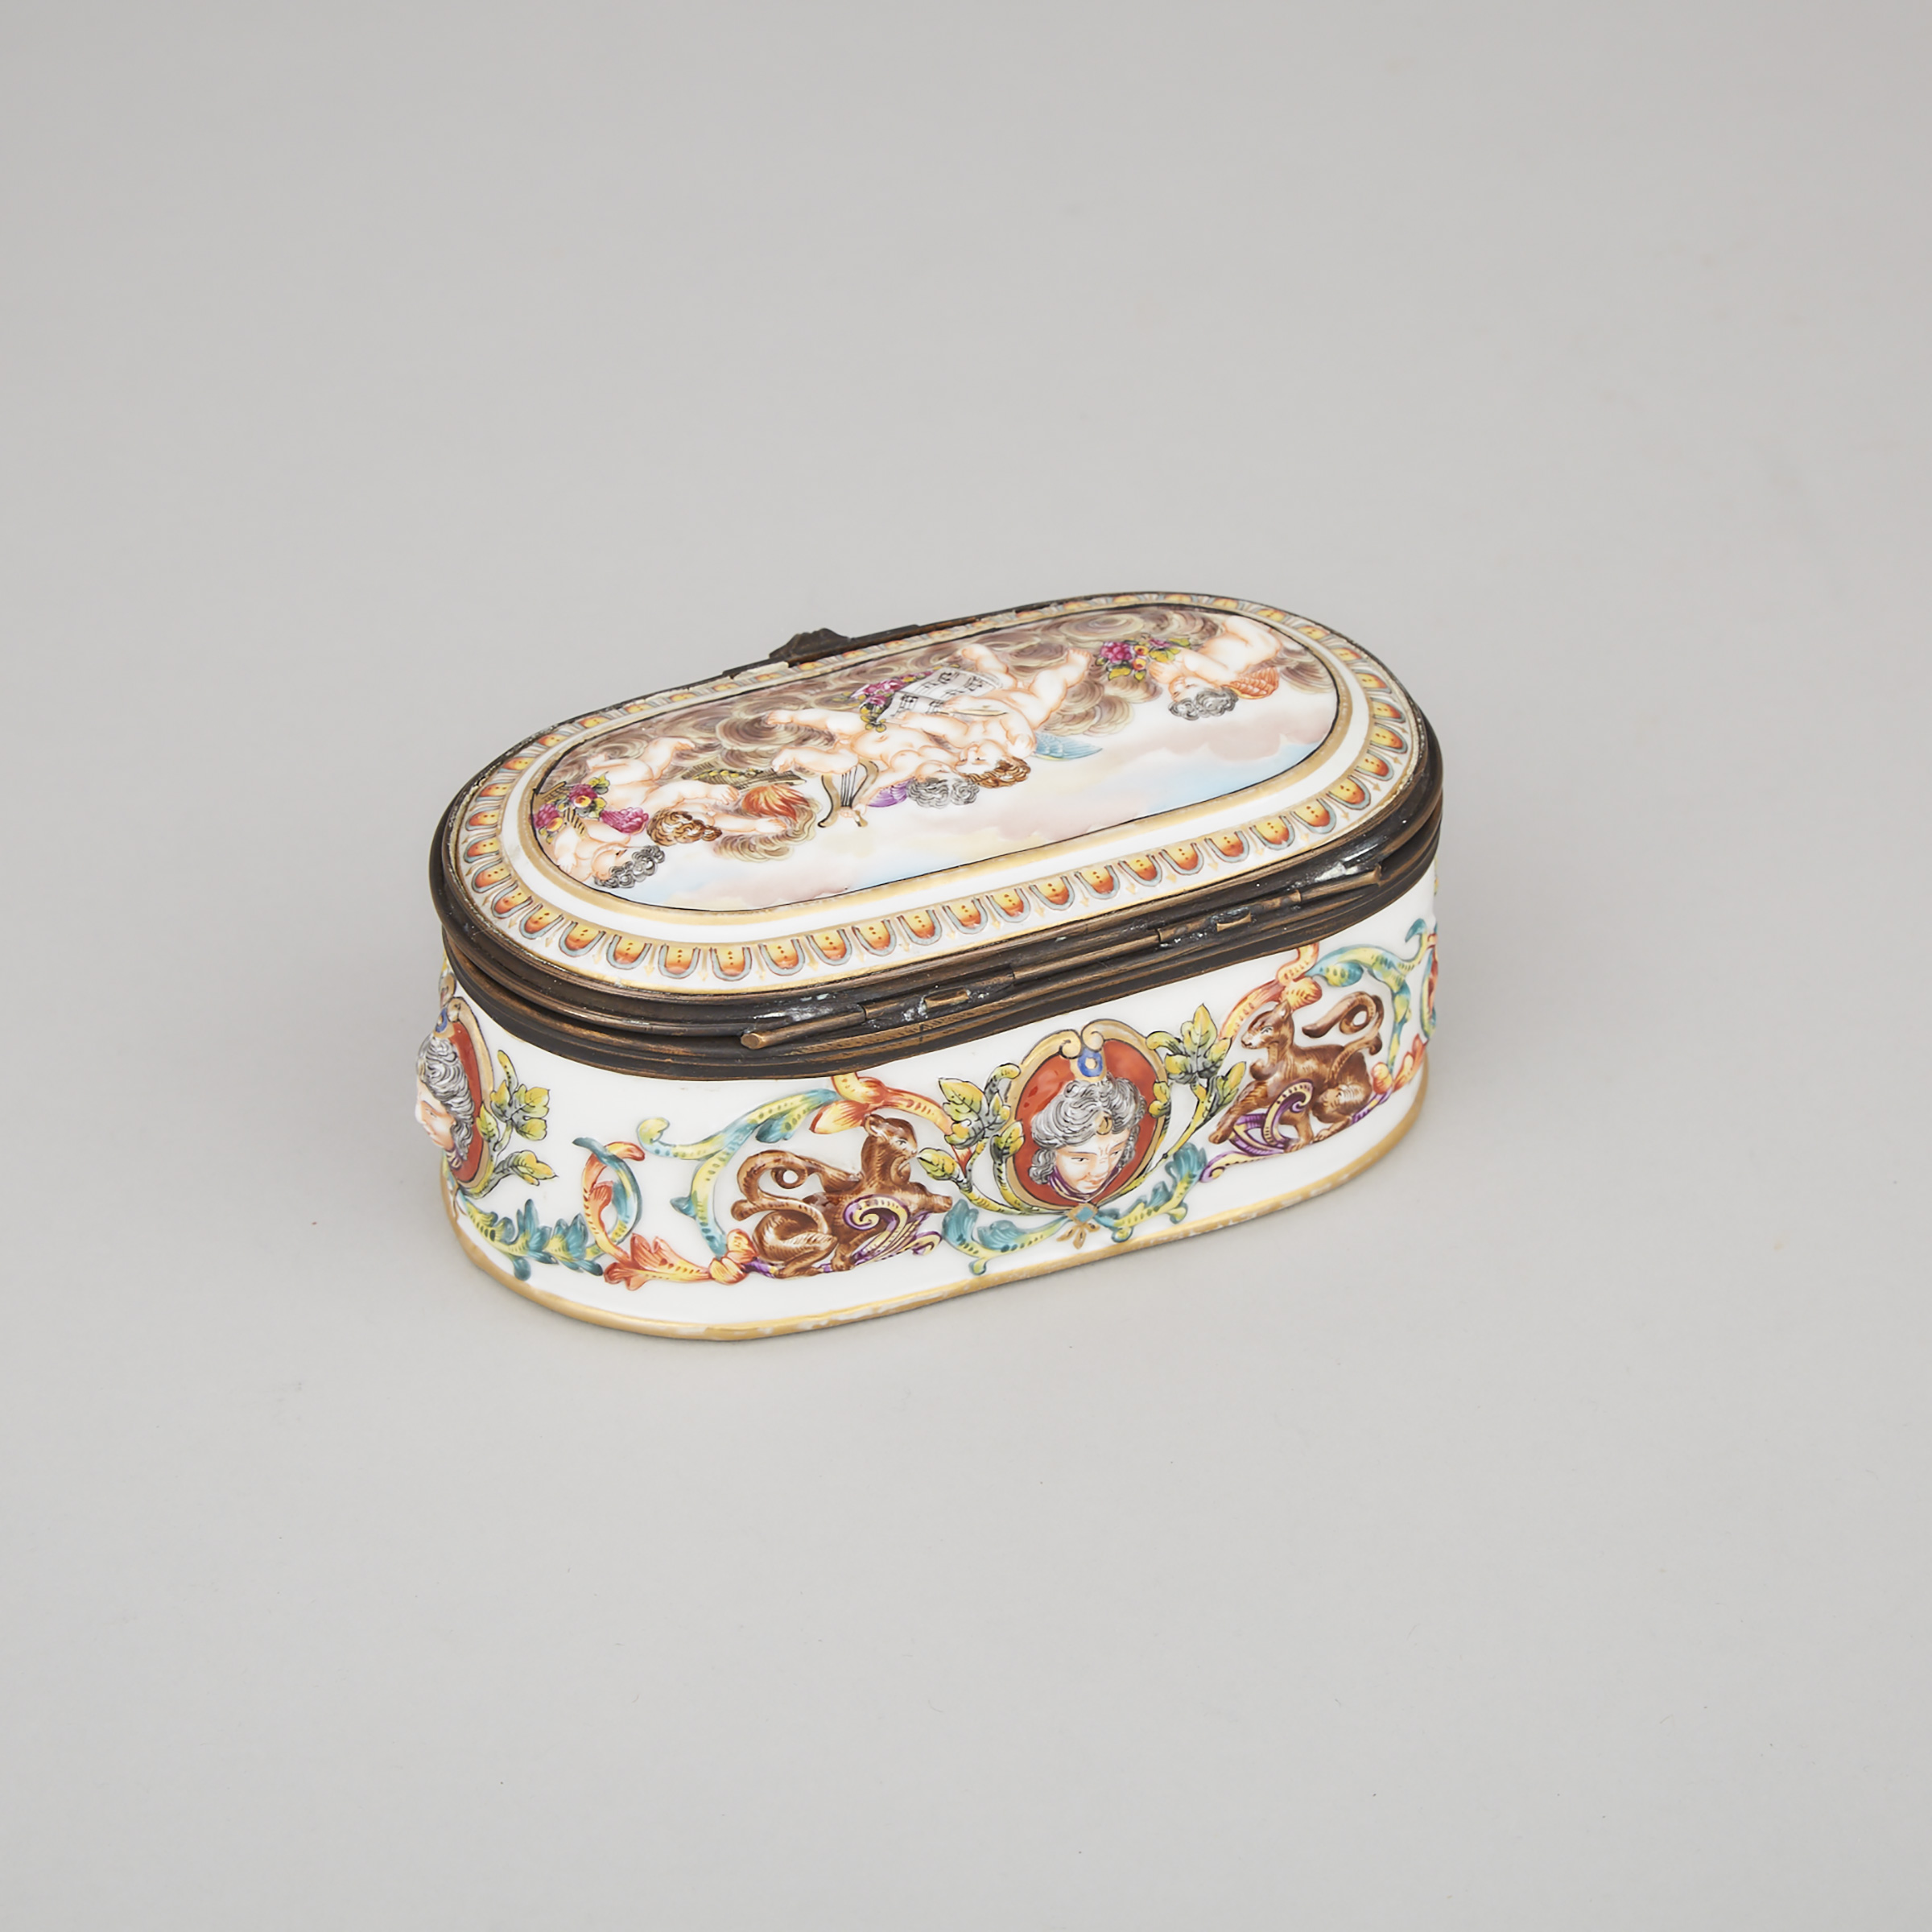 'Naples' Oblong Casket, late 19th/early 20th century